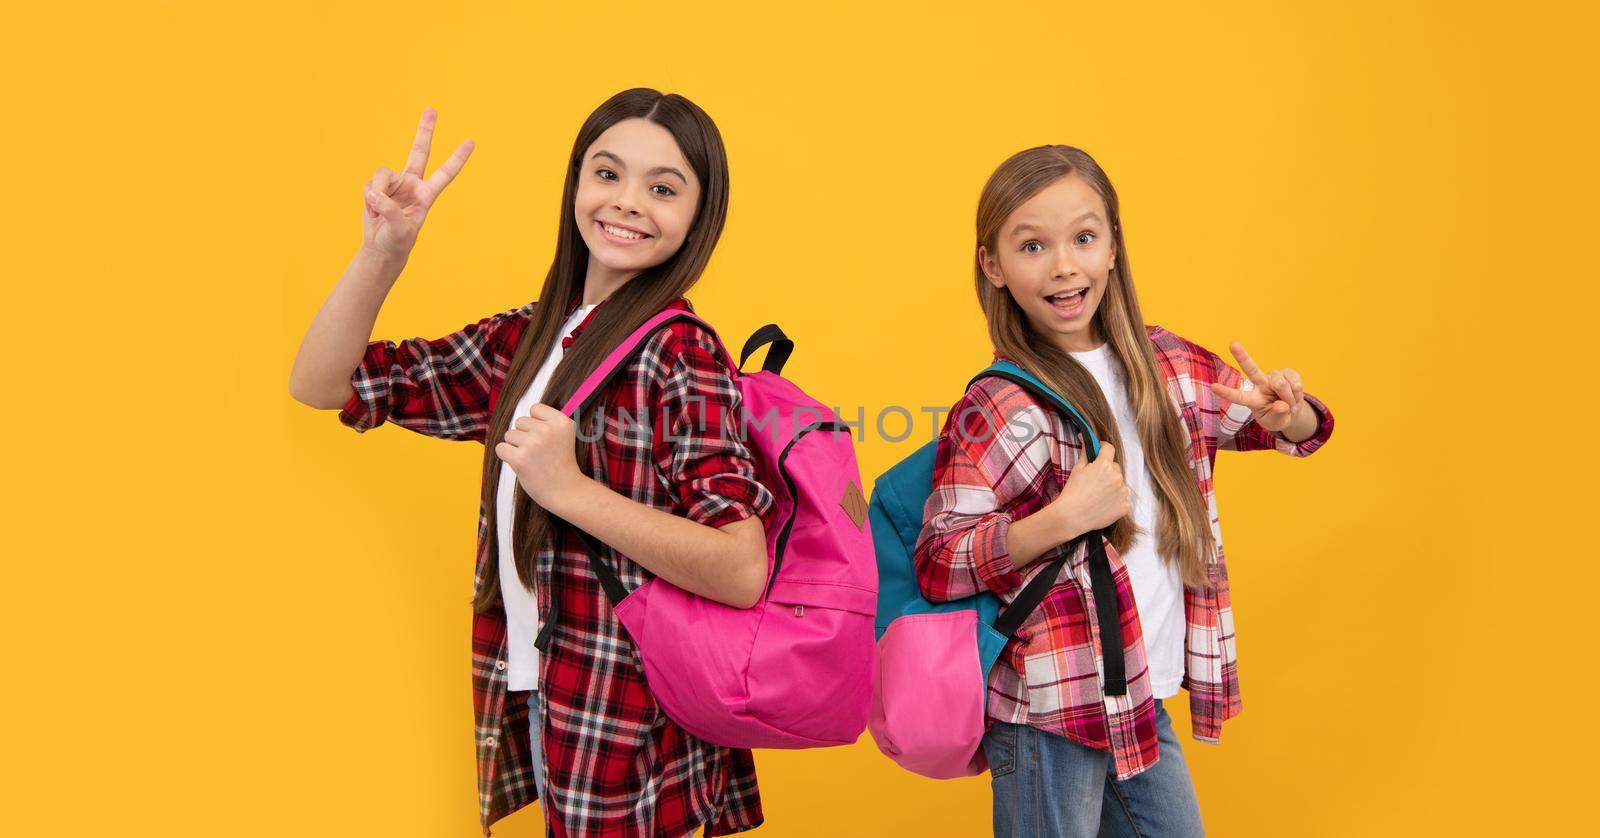 back to school. knowledge day. concept of education. kids with long hair on yellow background. september 1. happy childhood. children with school bag. cool teen girls carry backpack.